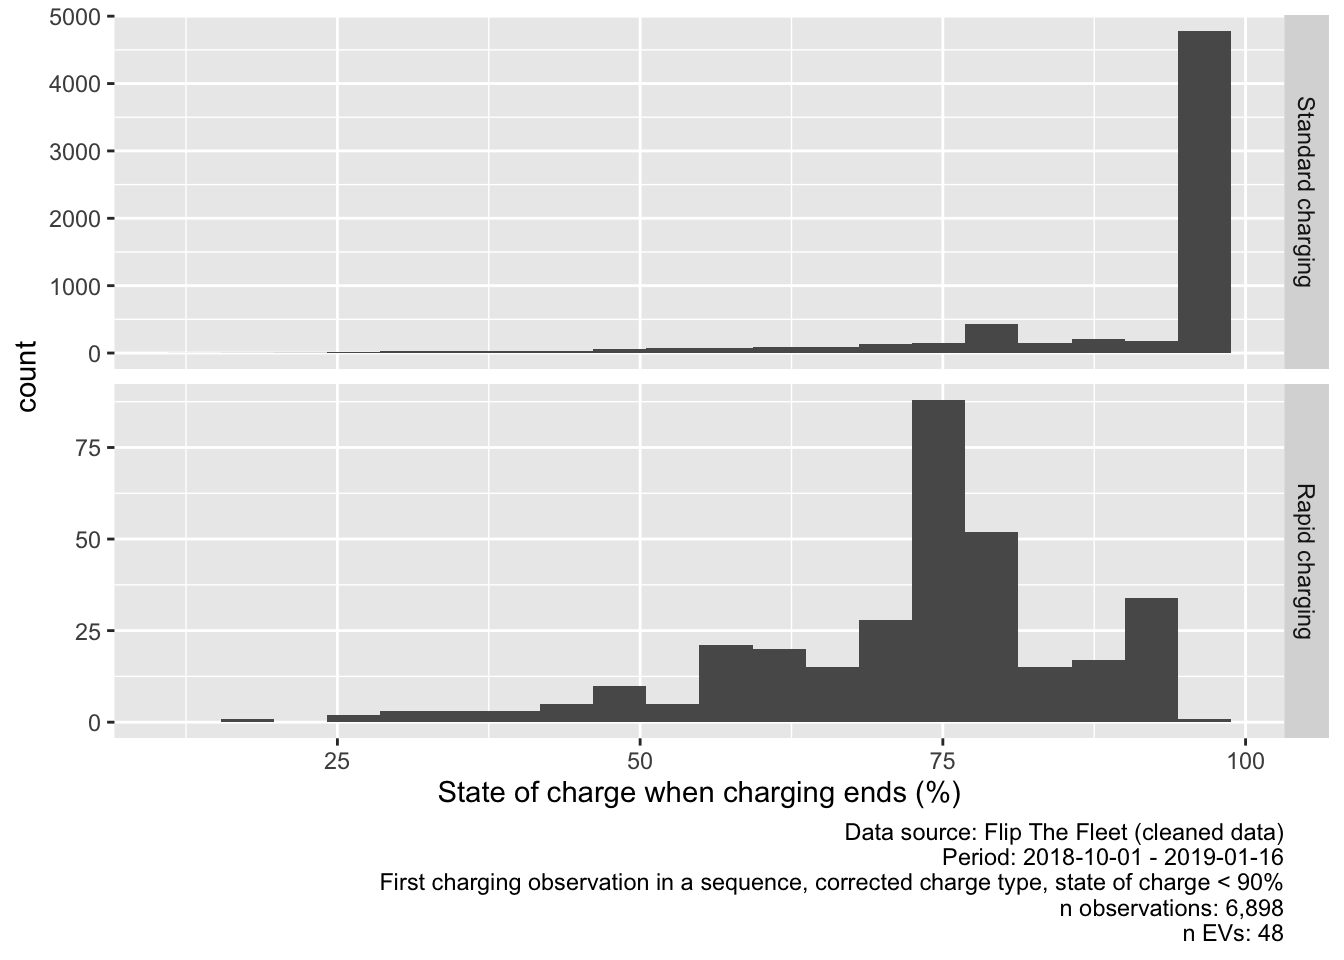 Value of state of charge at end of charging sequence (chargeType corrected, all values